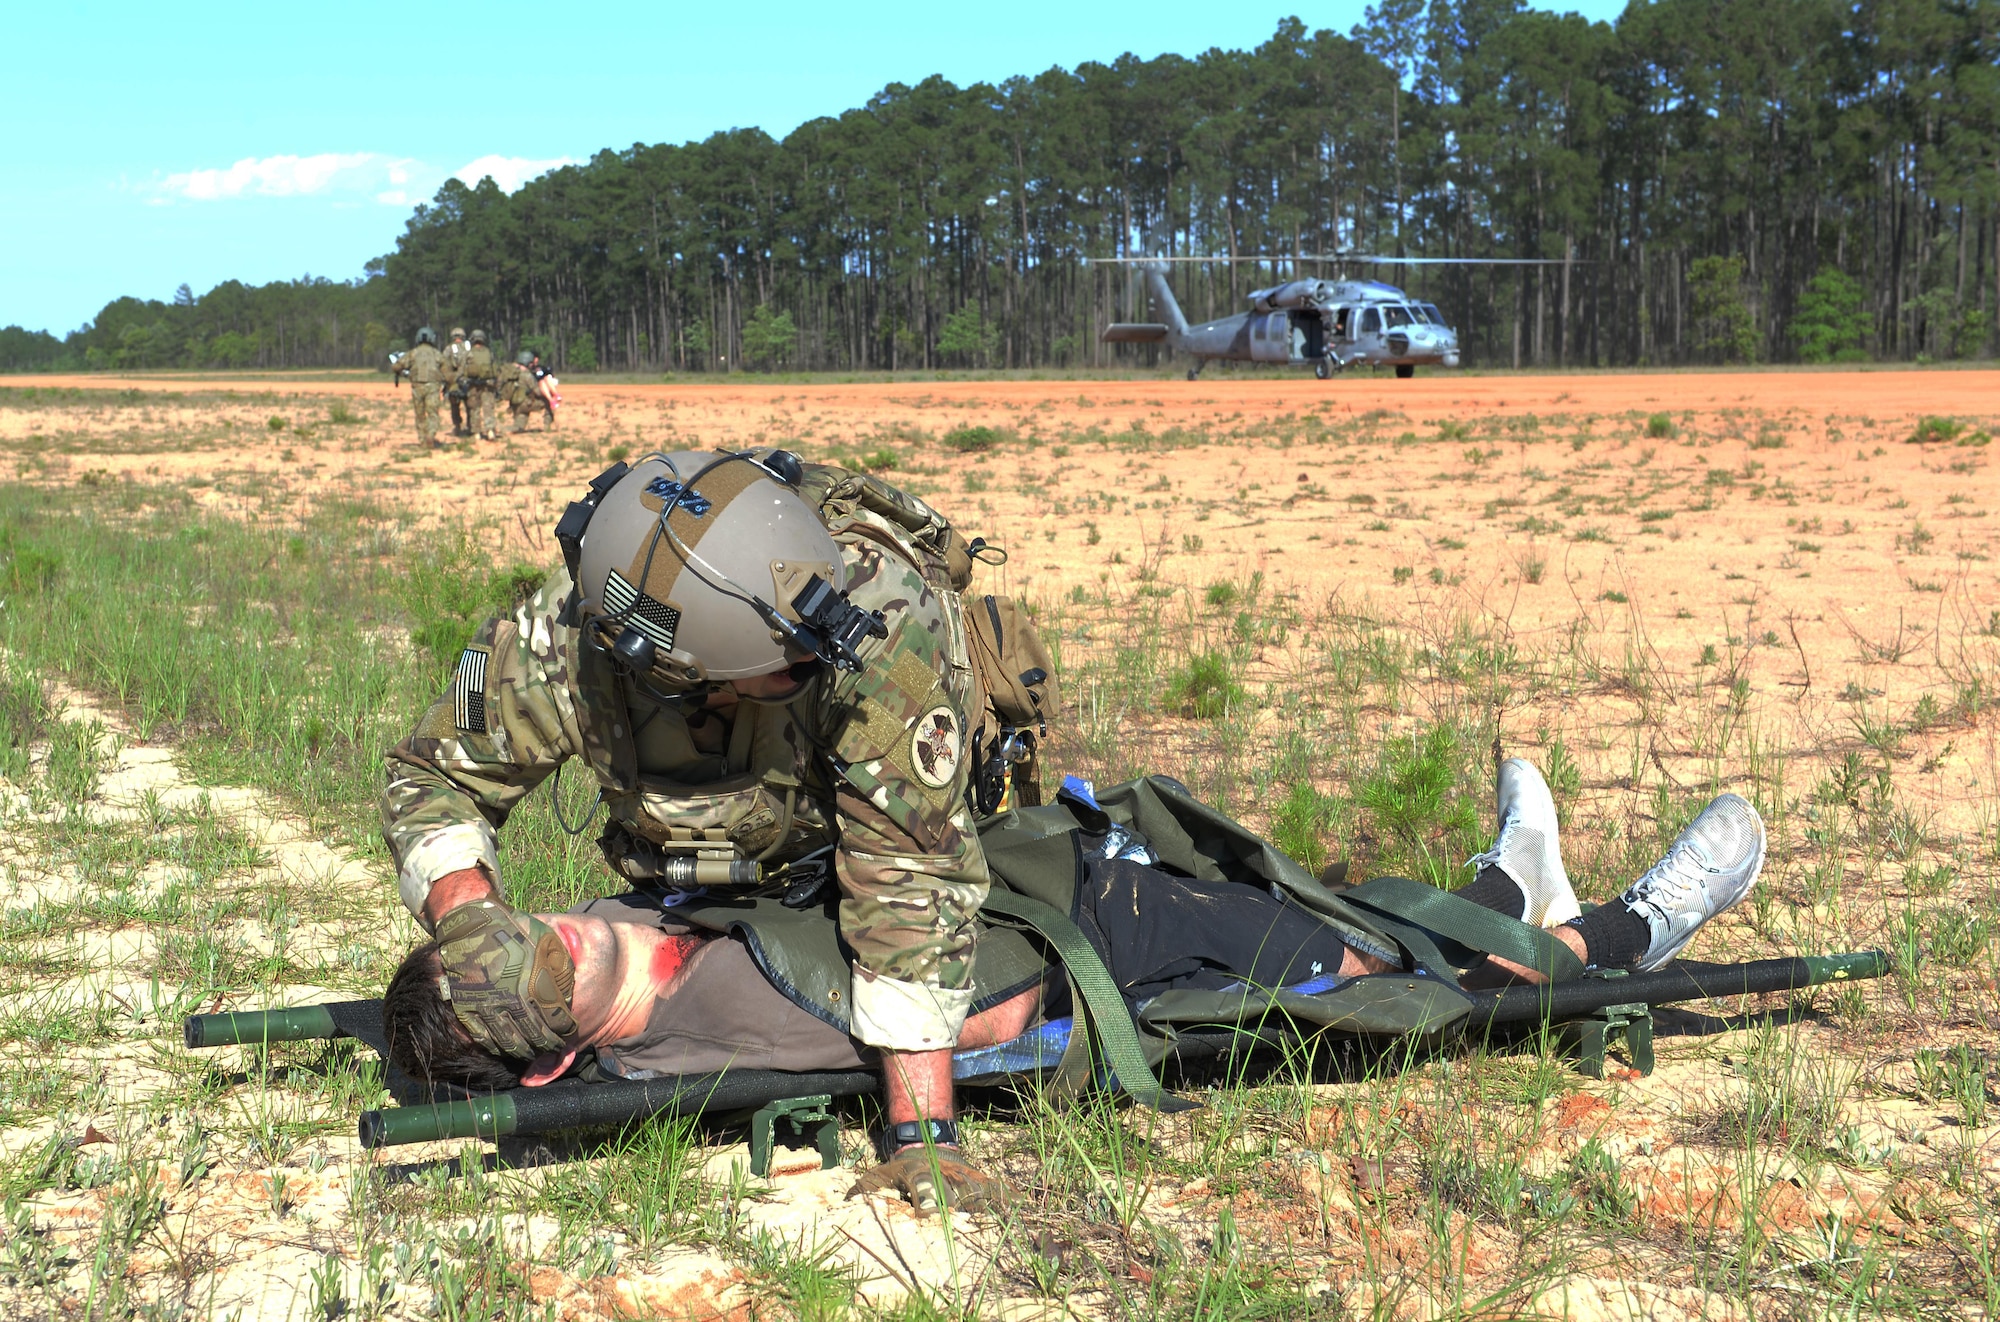 U.S. Air Force Staff Sgt. Dave Wieznicki, a combat medic assigned to the 27th Special Operations Support Squadron, Cannon Air Force Base, N.M., prepares to litter carry a patient to a U.S. Navy MH-60S Seahawk at Eglin Range, Fla., May 4, 2016, during Exercise Emerald Warrior 16. Emerald Warrior is a U.S. Special Operations Command sponsored mission rehearsal exercise during which joint special operations forces train to respond to real and emerging worldwide threats. (U.S. Air Force photo by Senior Airman Jasmonet Jackson)
